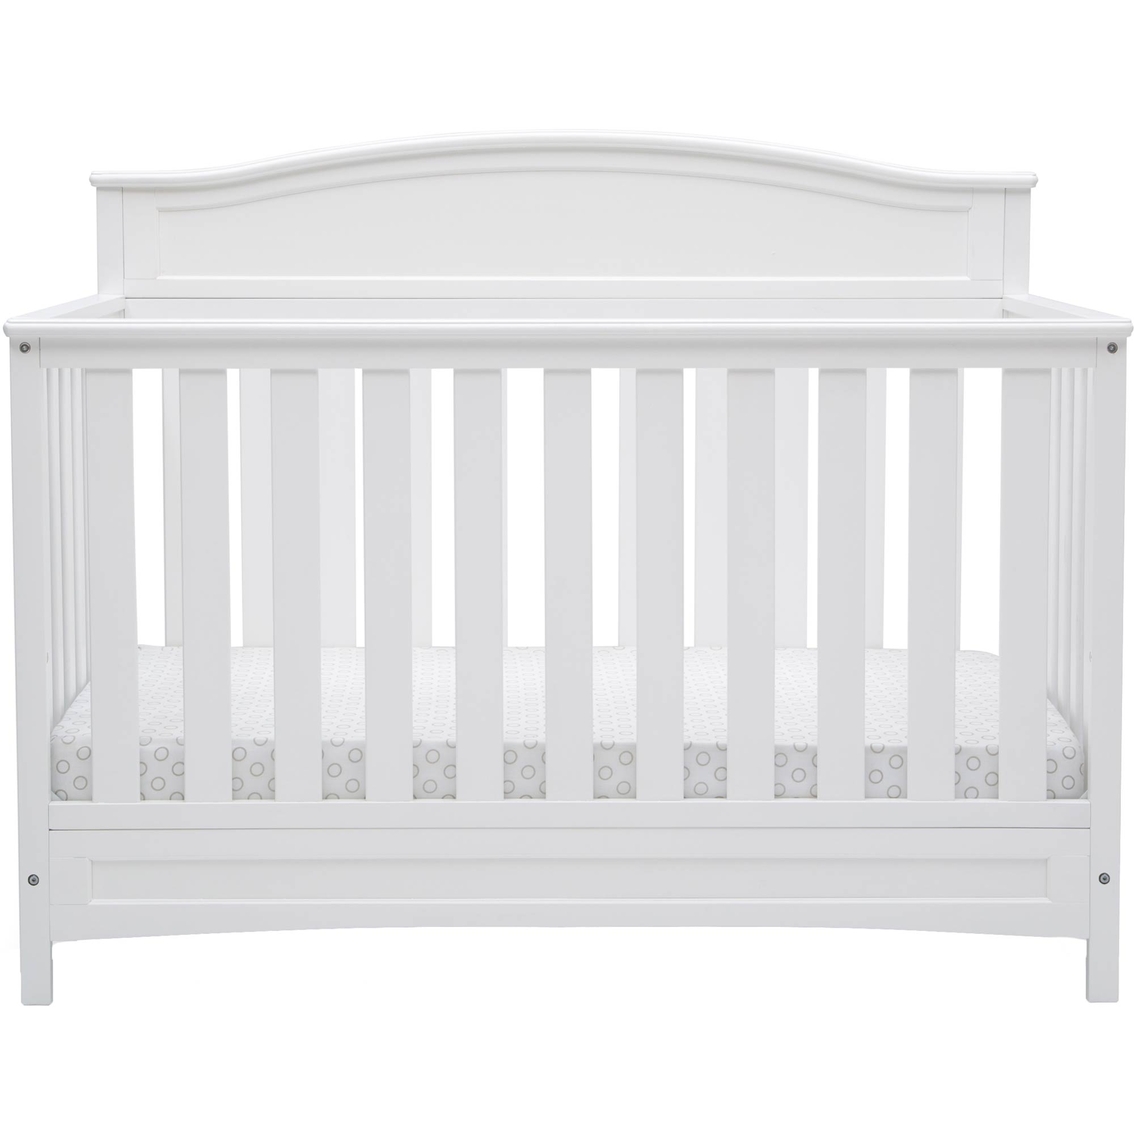 Delta Children Emery 4 in 1 Convertible Crib, Greenguard Gold Certified - Image 1 of 3